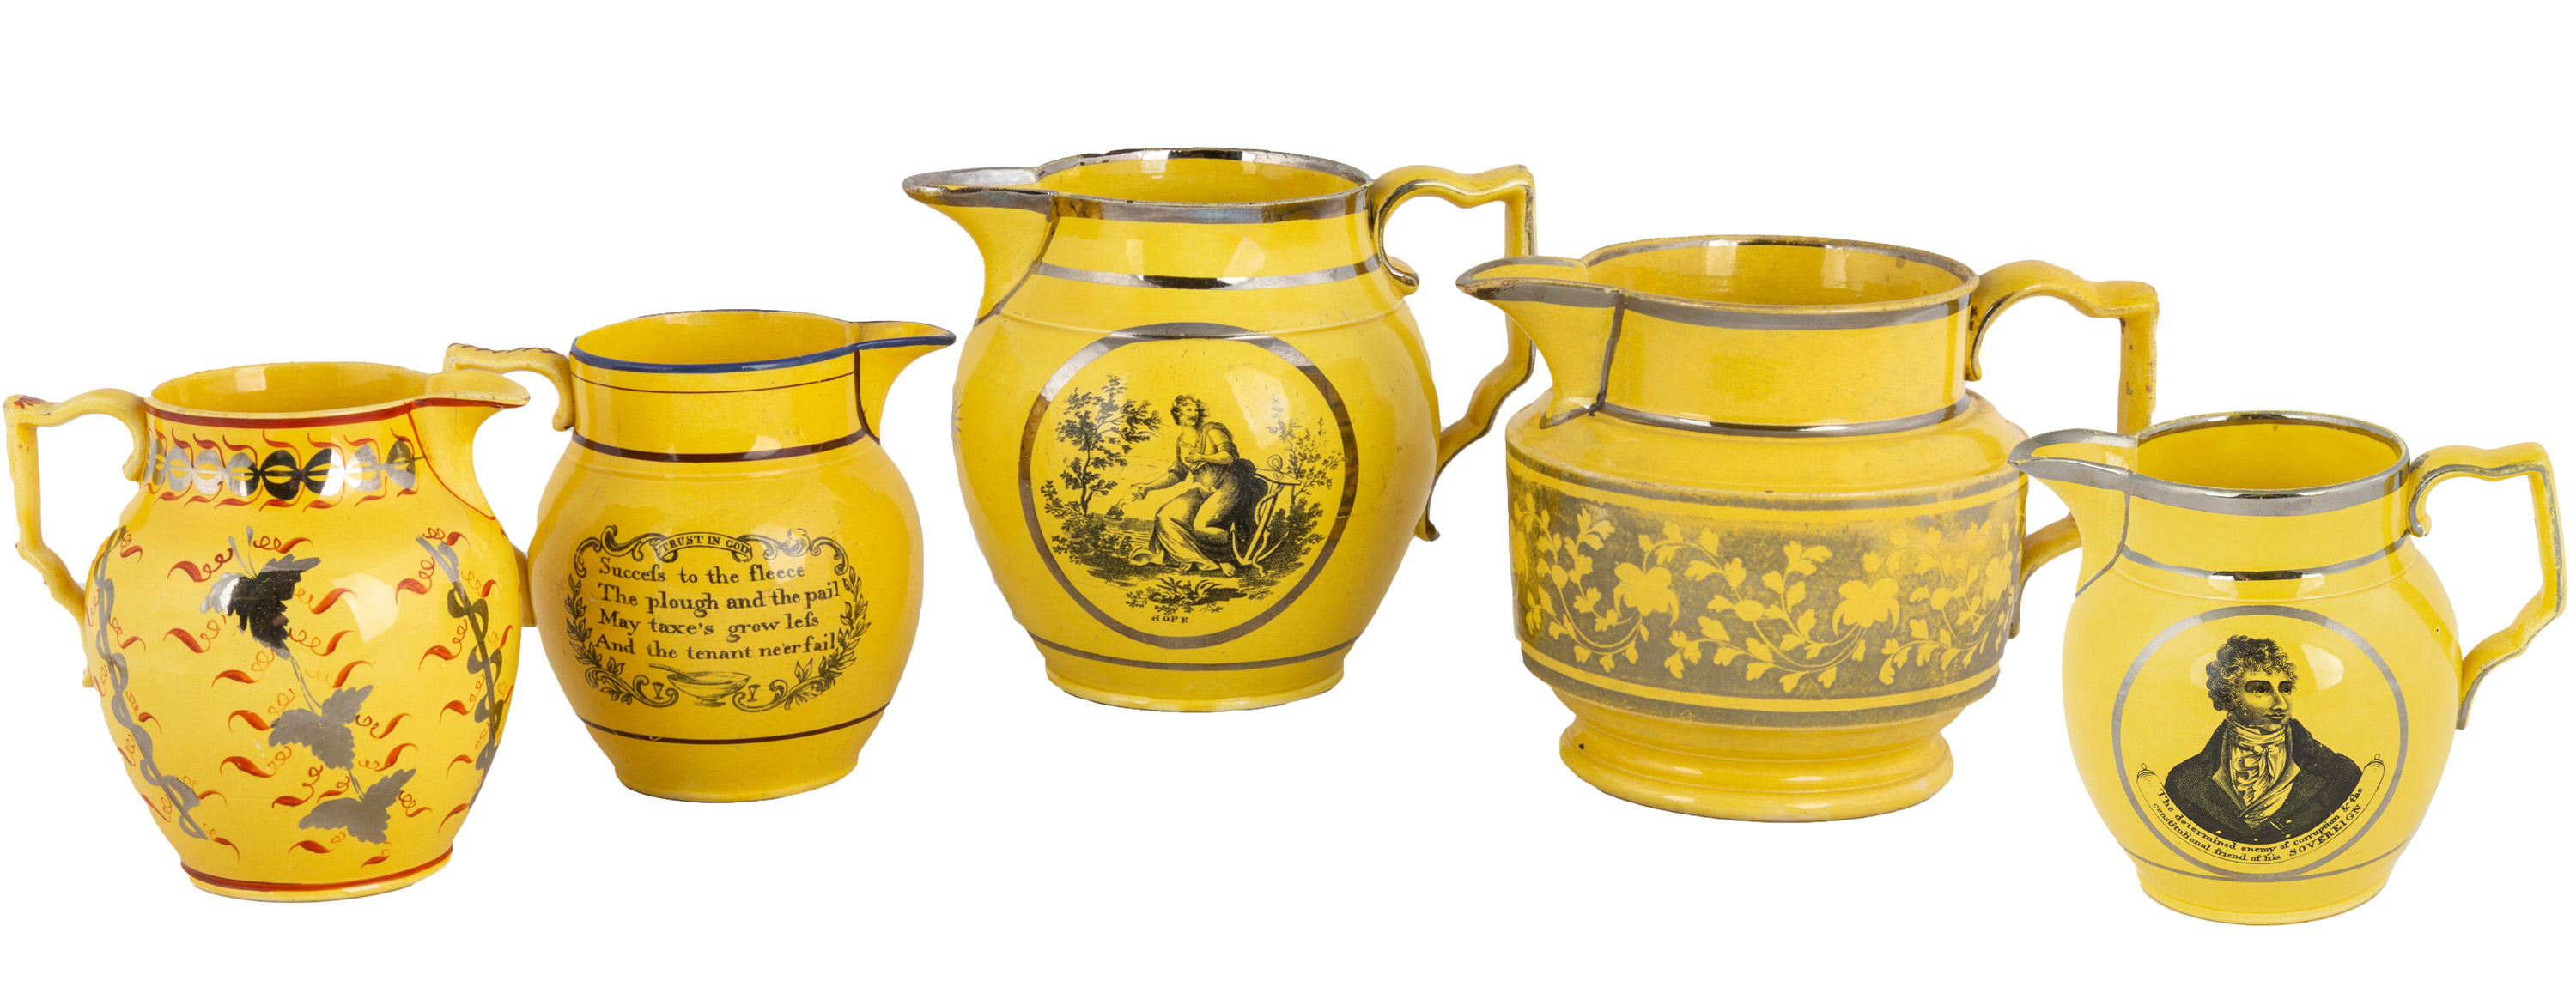 GROUP OF YELLOW LUSTERWARE PITCHERS 28d6ed